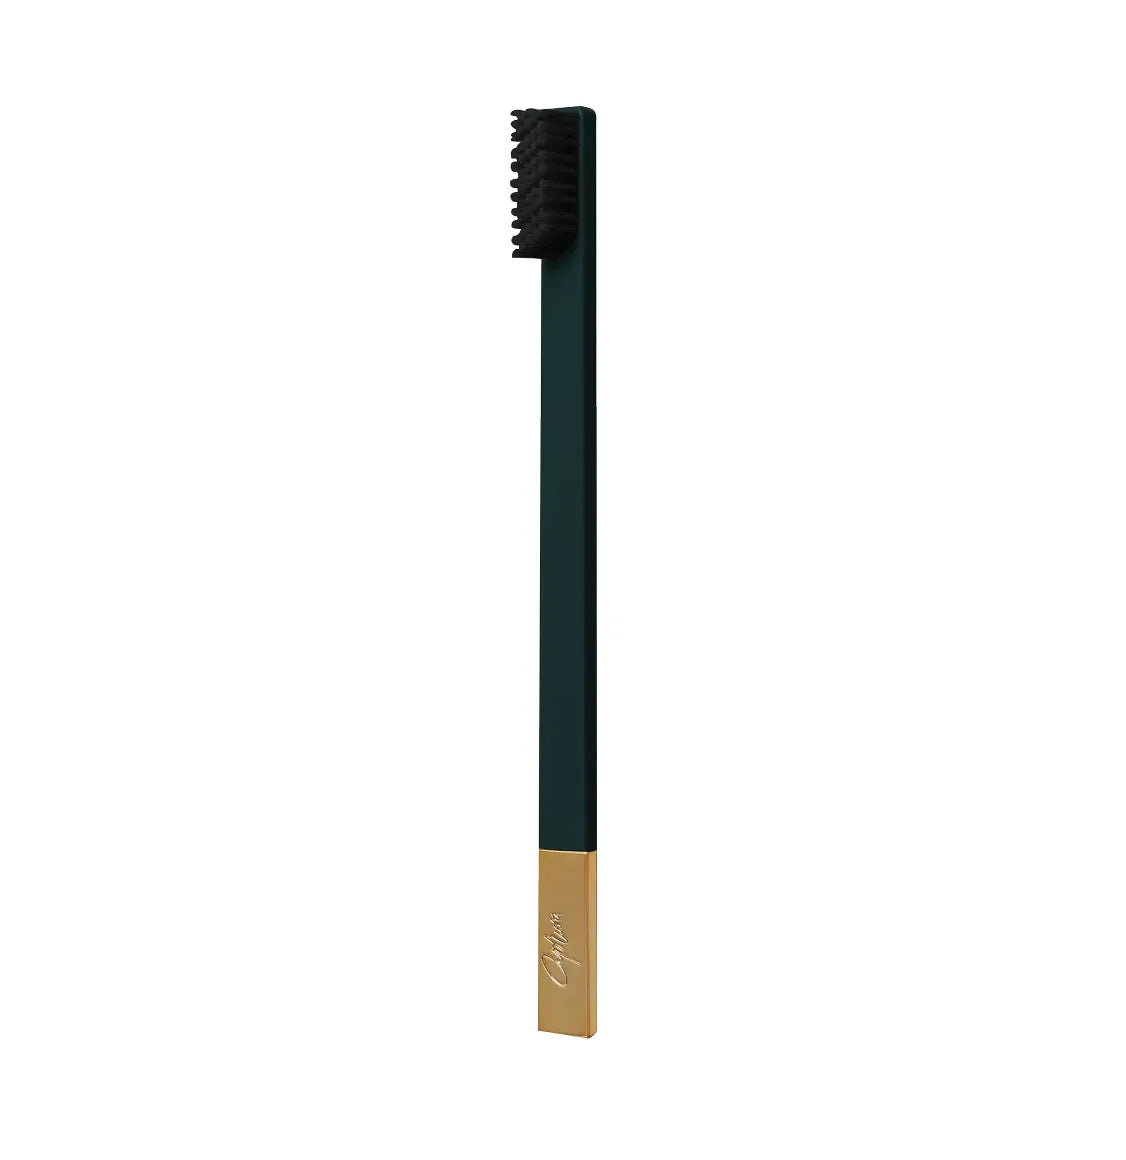 The asymmetric soft bristle head is perfect for cleaning and polishing the tooth surface. 